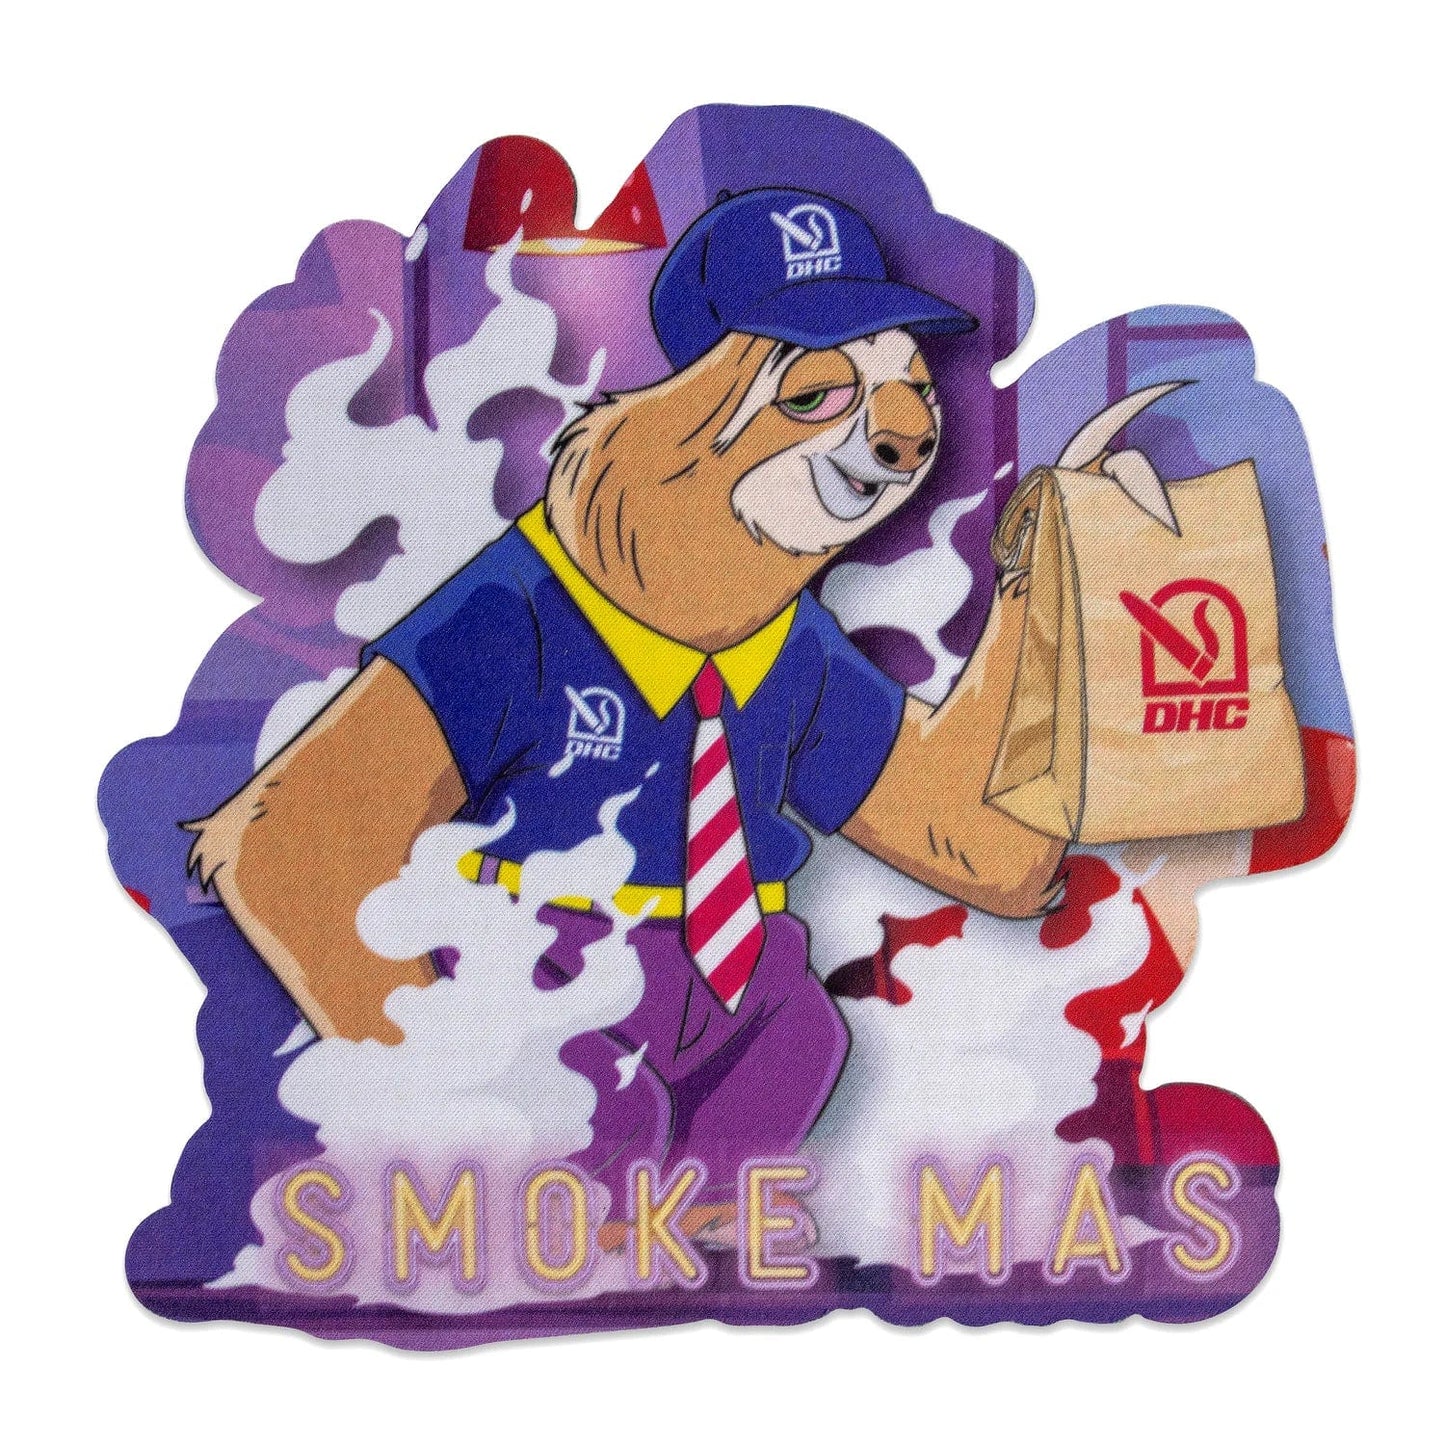 Daily High Club Subscription box April 2024 "Smoke Mas" Limited Edition Deluxe Box